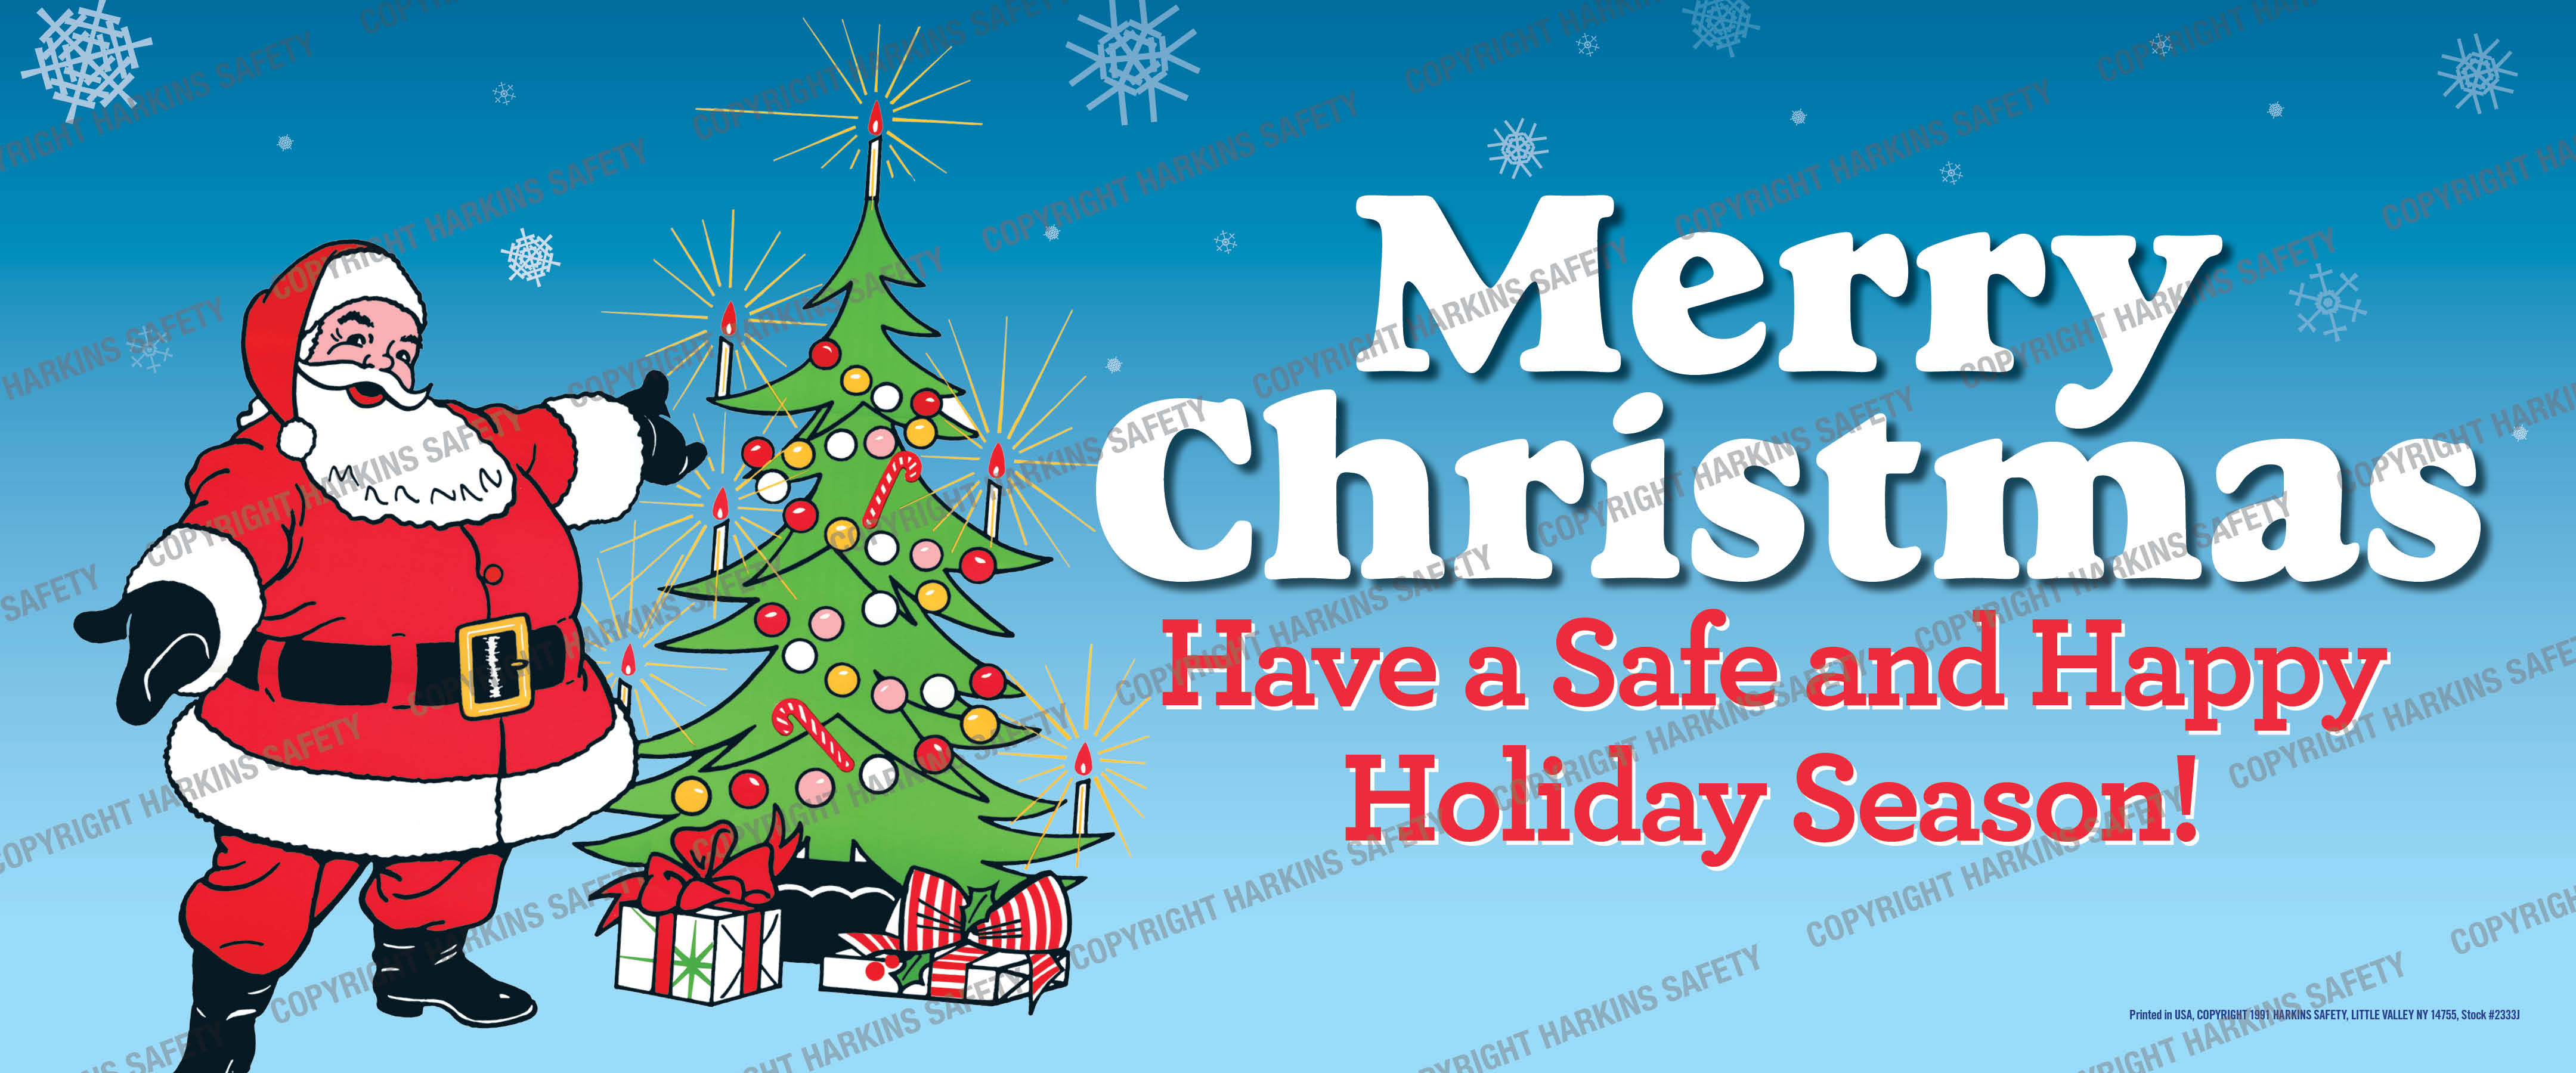 MERRY CHRISTMAS HAVE A SAFE, HAPPY HOLIDAY - Harkins Safety